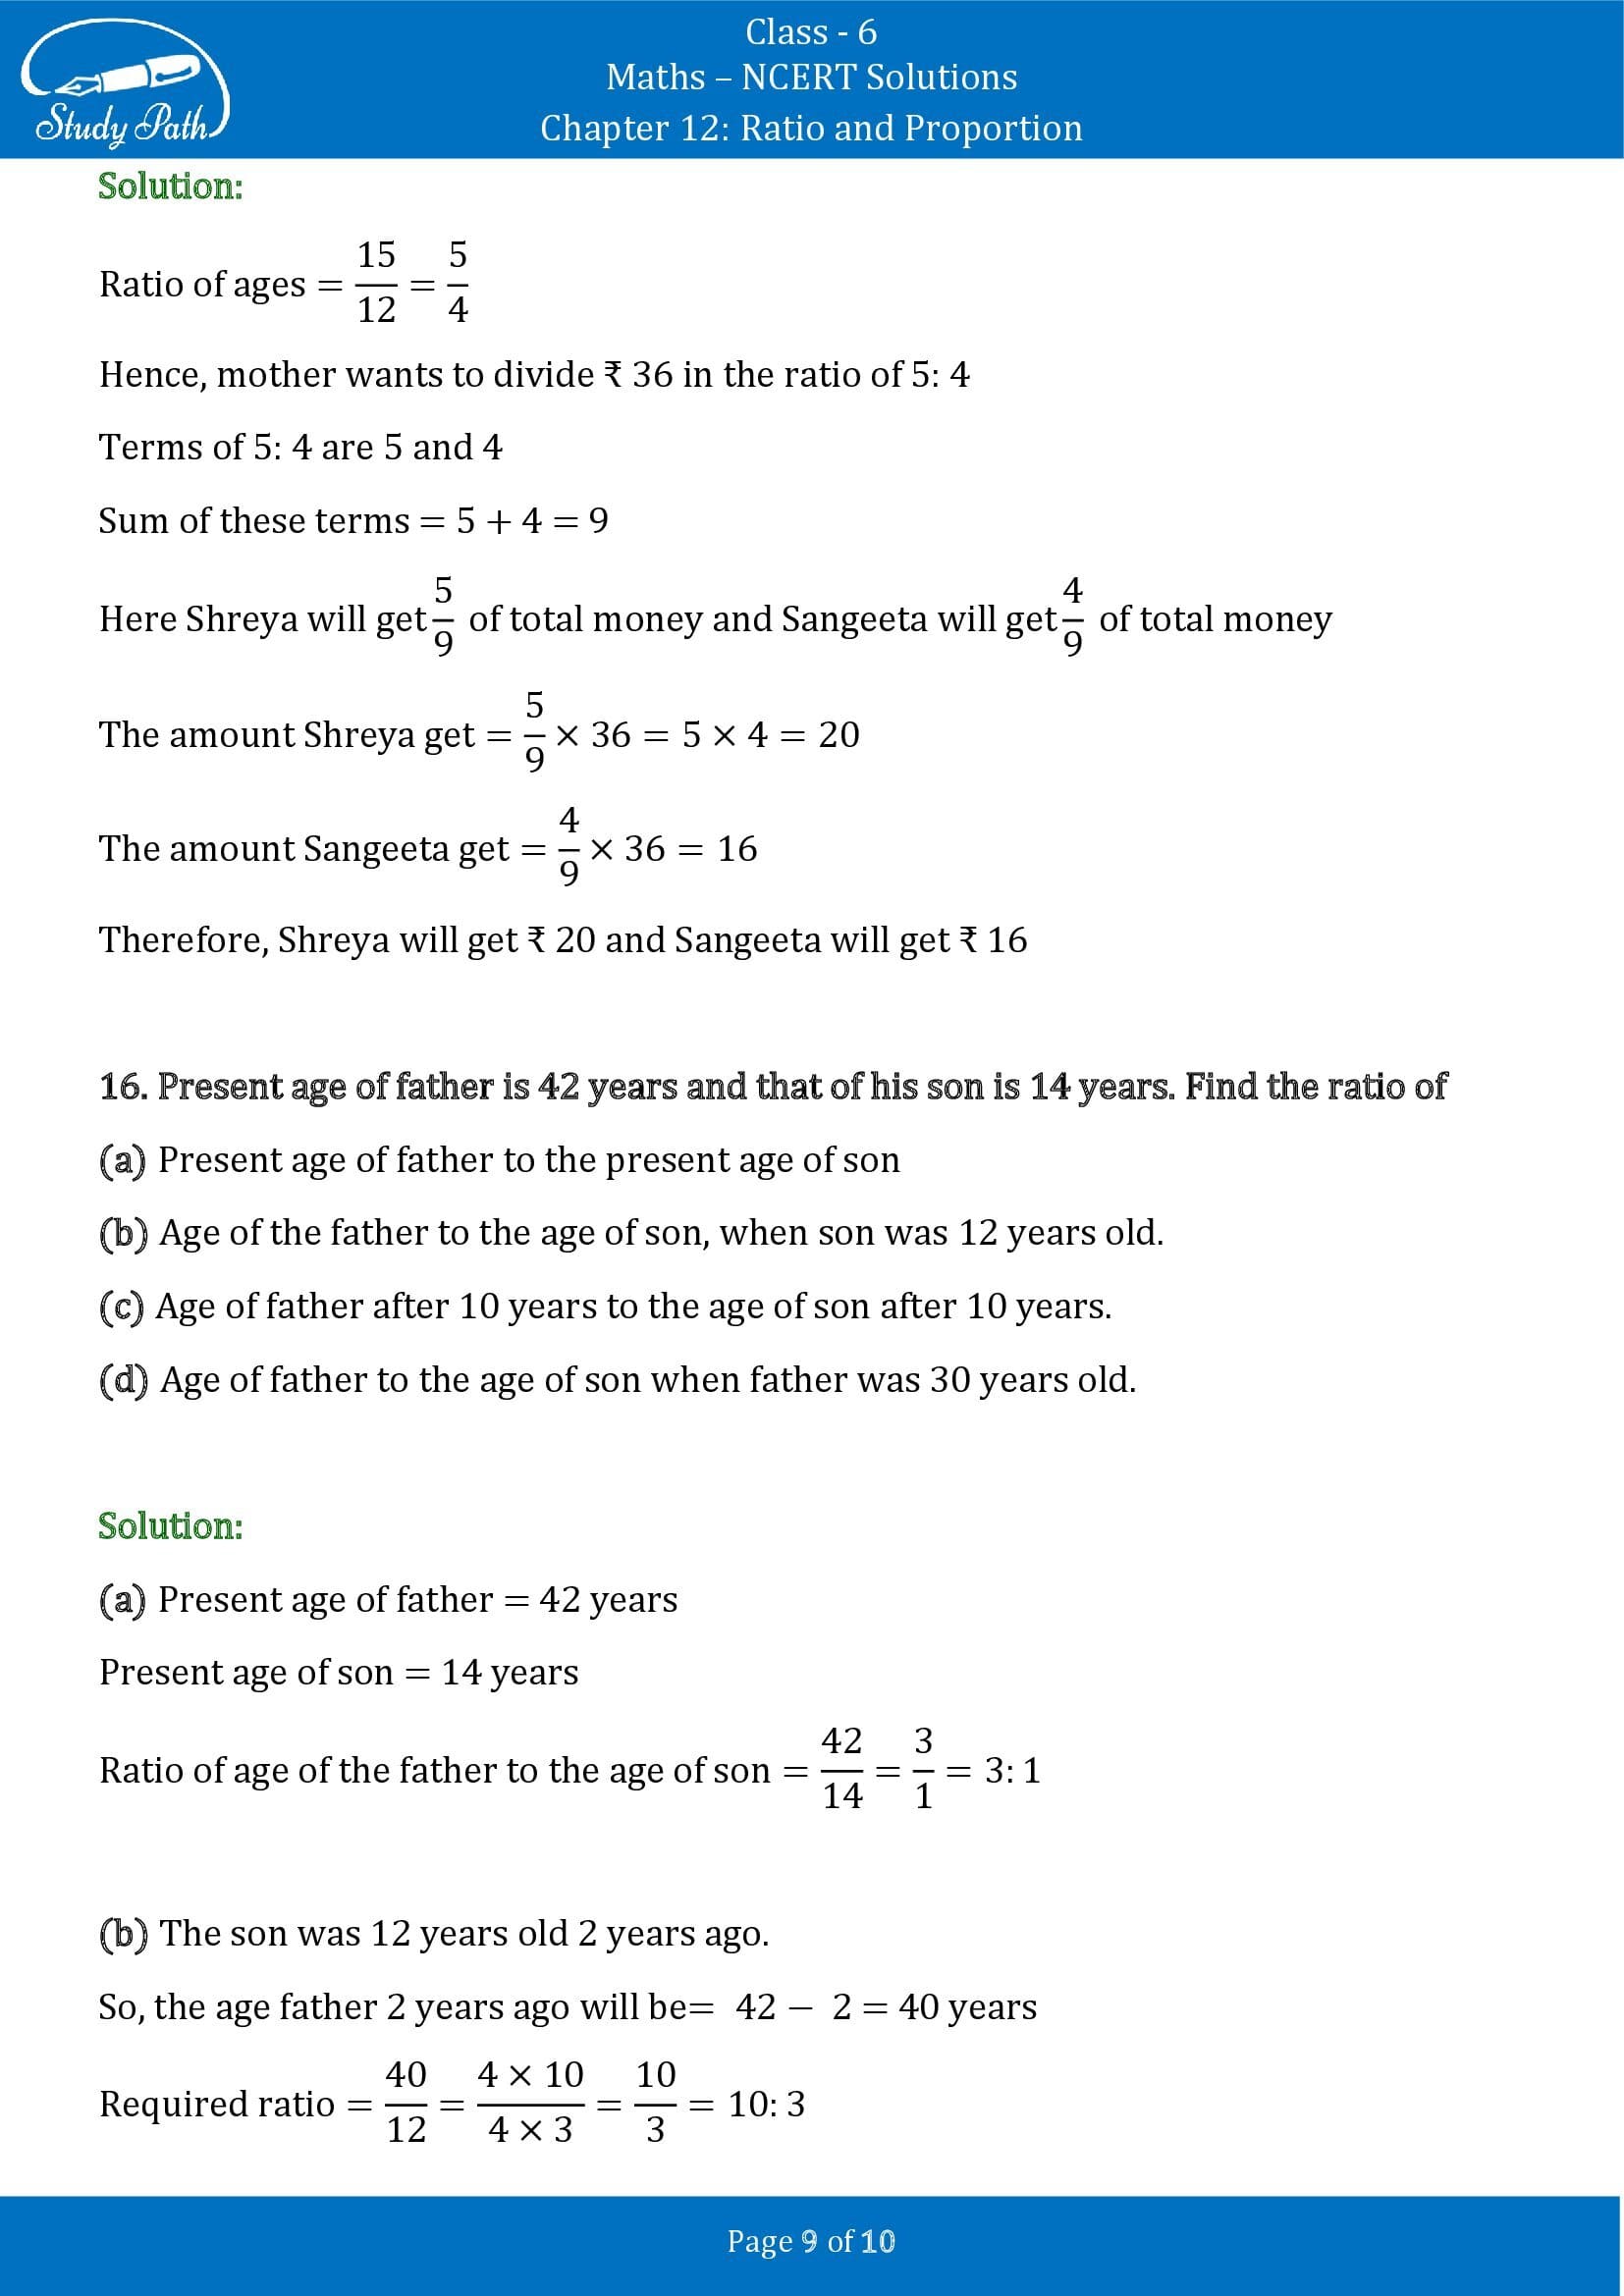 NCERT Solutions for Class 6 Maths Chapter 12 Ratio and Proportion Exercise 12.1 00009